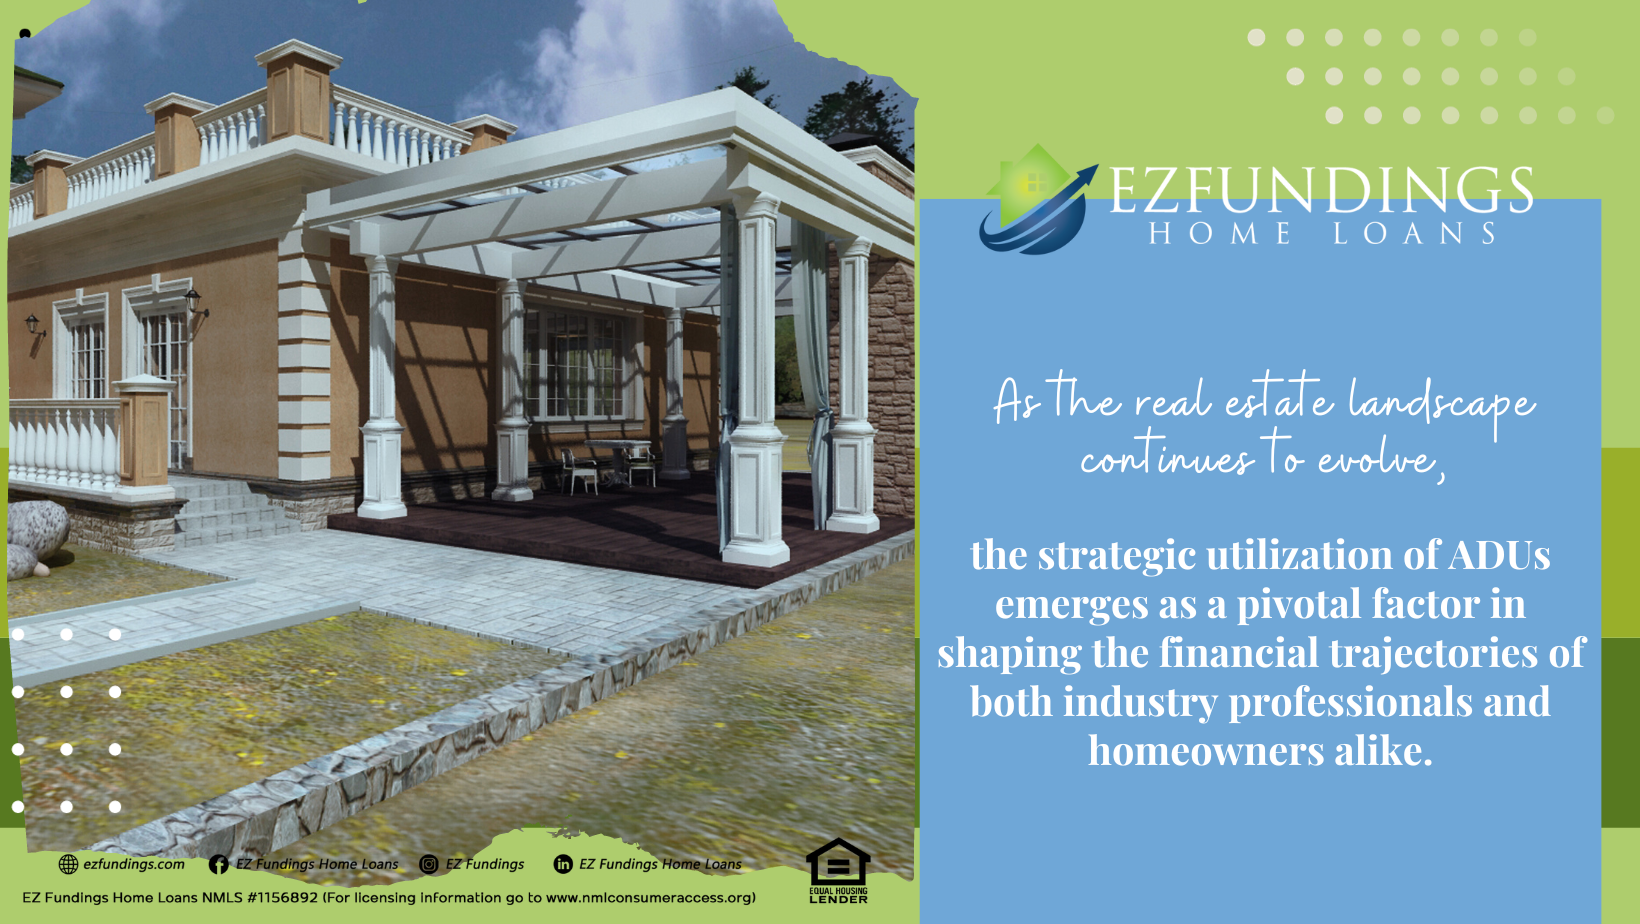 The photo shows an Accessory Dwelling Unit or ADU with a text overlay saying "As the real estate landscape continues to evolve, the strategic utilization of ADUs emerges as a pivotal factor in shaping the financial trajectories of both industry professionals and homeowners alike."